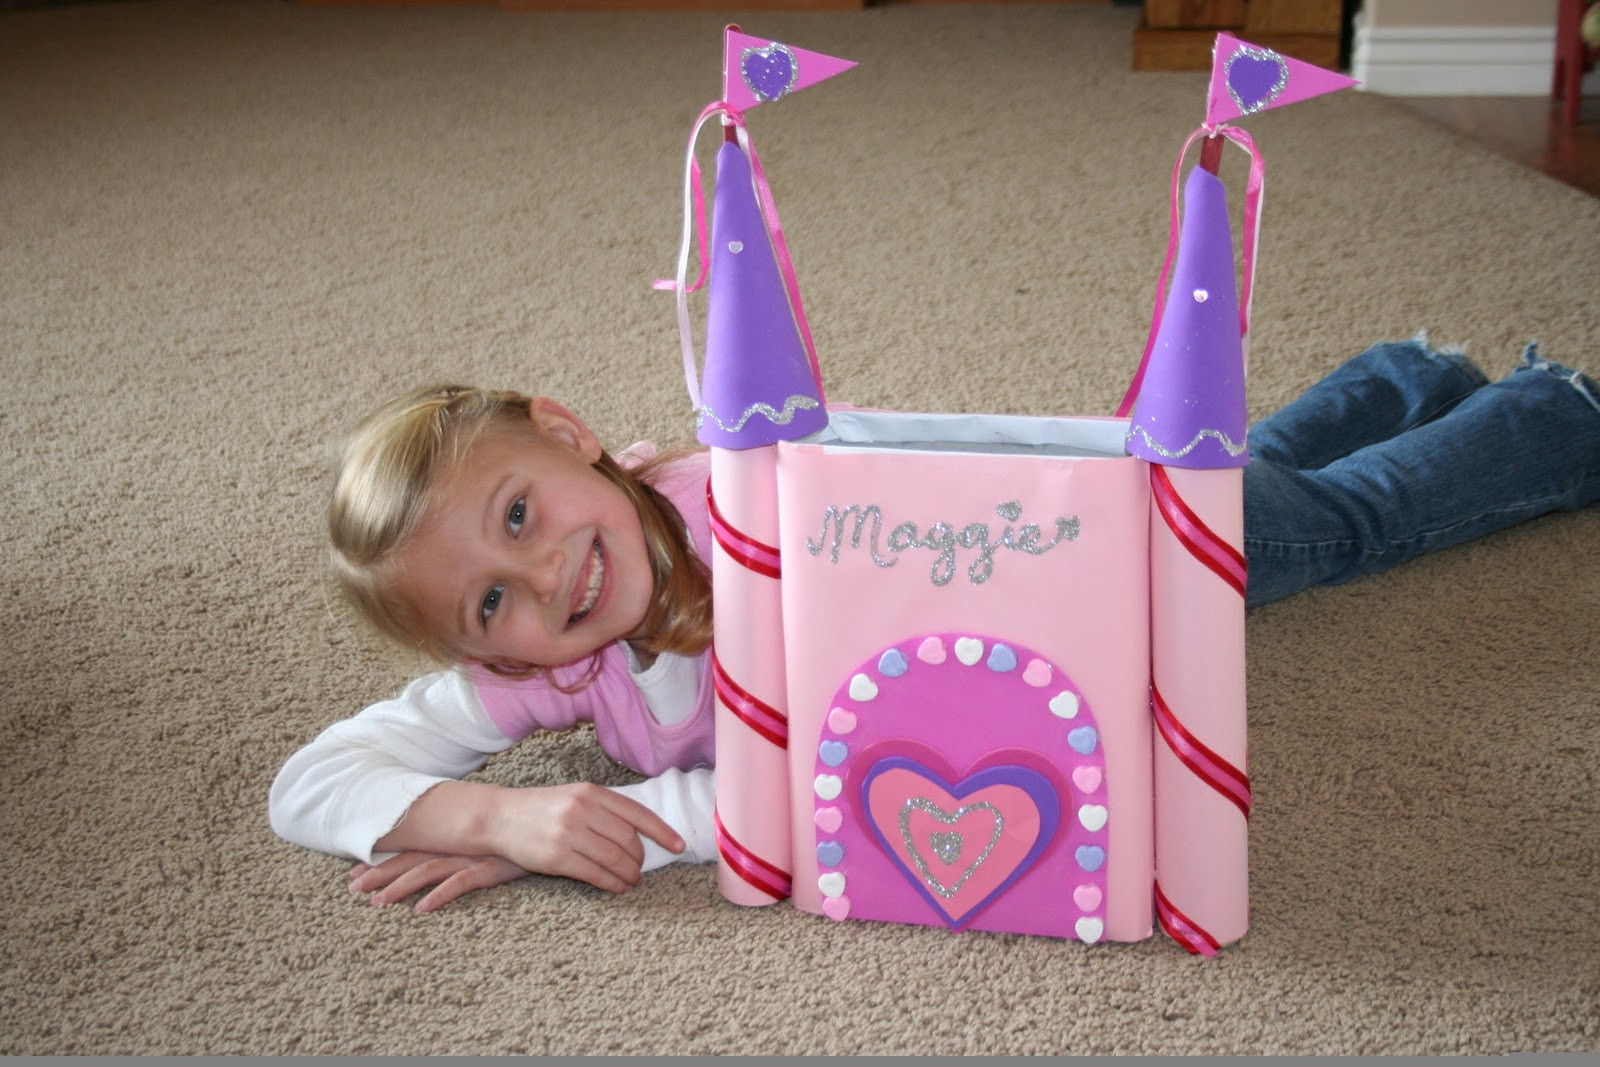 Valentine Gift Ideas For High School Girlfriend
 Mommy Lessons 101 Creative Valentine Box 6 Castle